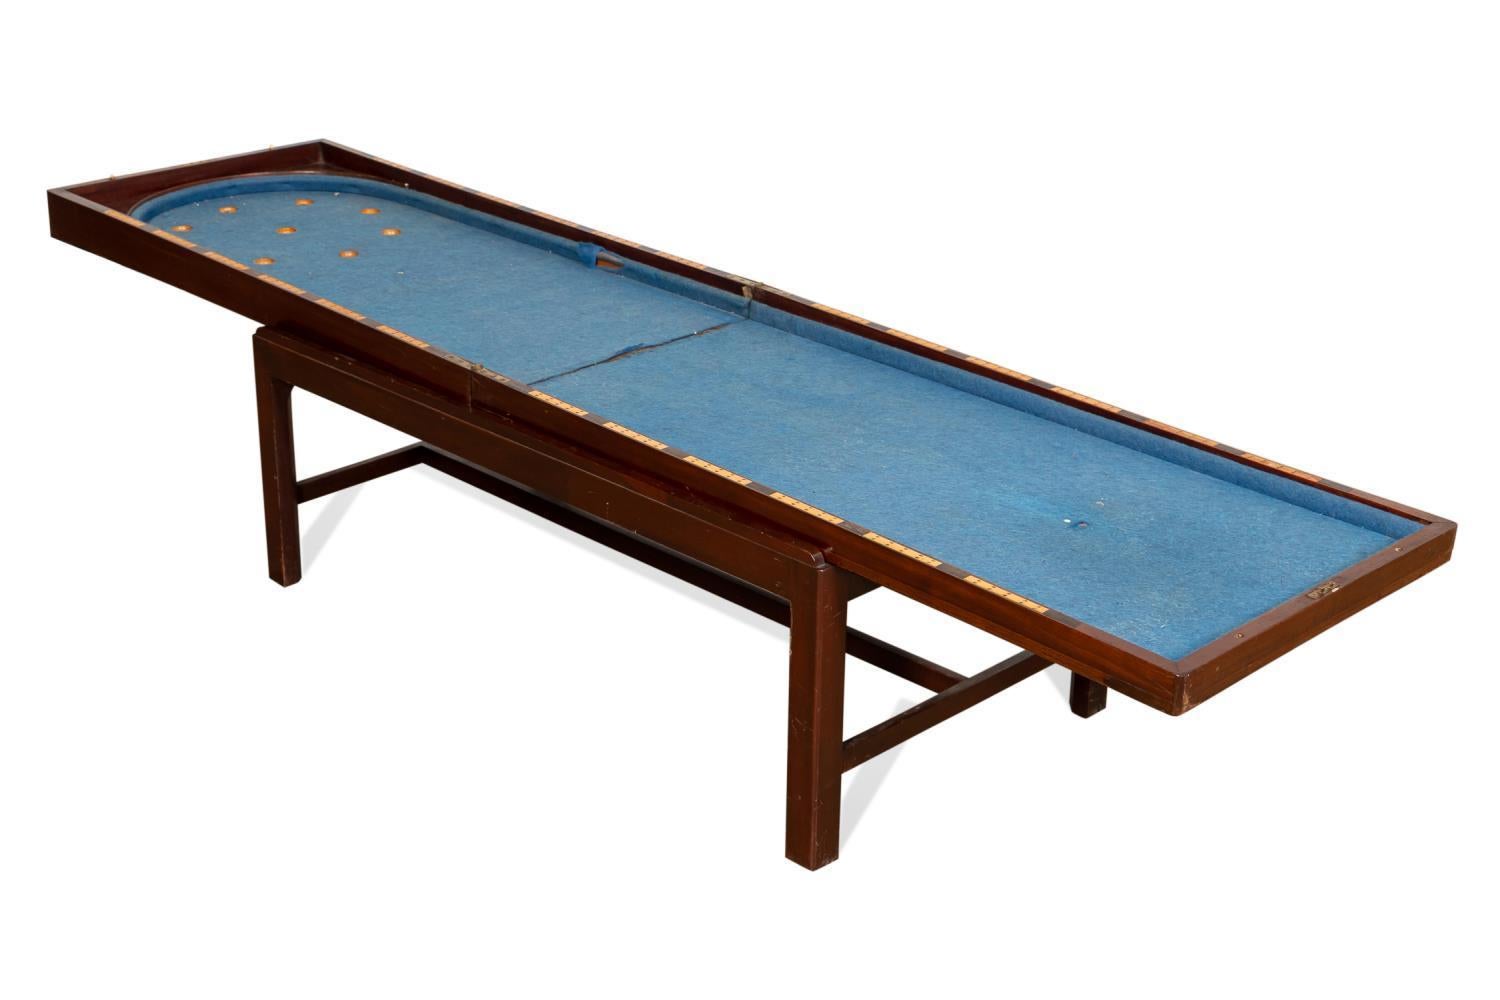 This unique item consists of a folded case that rests on a separate riser creating a graceful coffee table with a single end drawer. When the top case is unfolded it reveals a Bagatelle game board. The felt is in need of minor repairs.